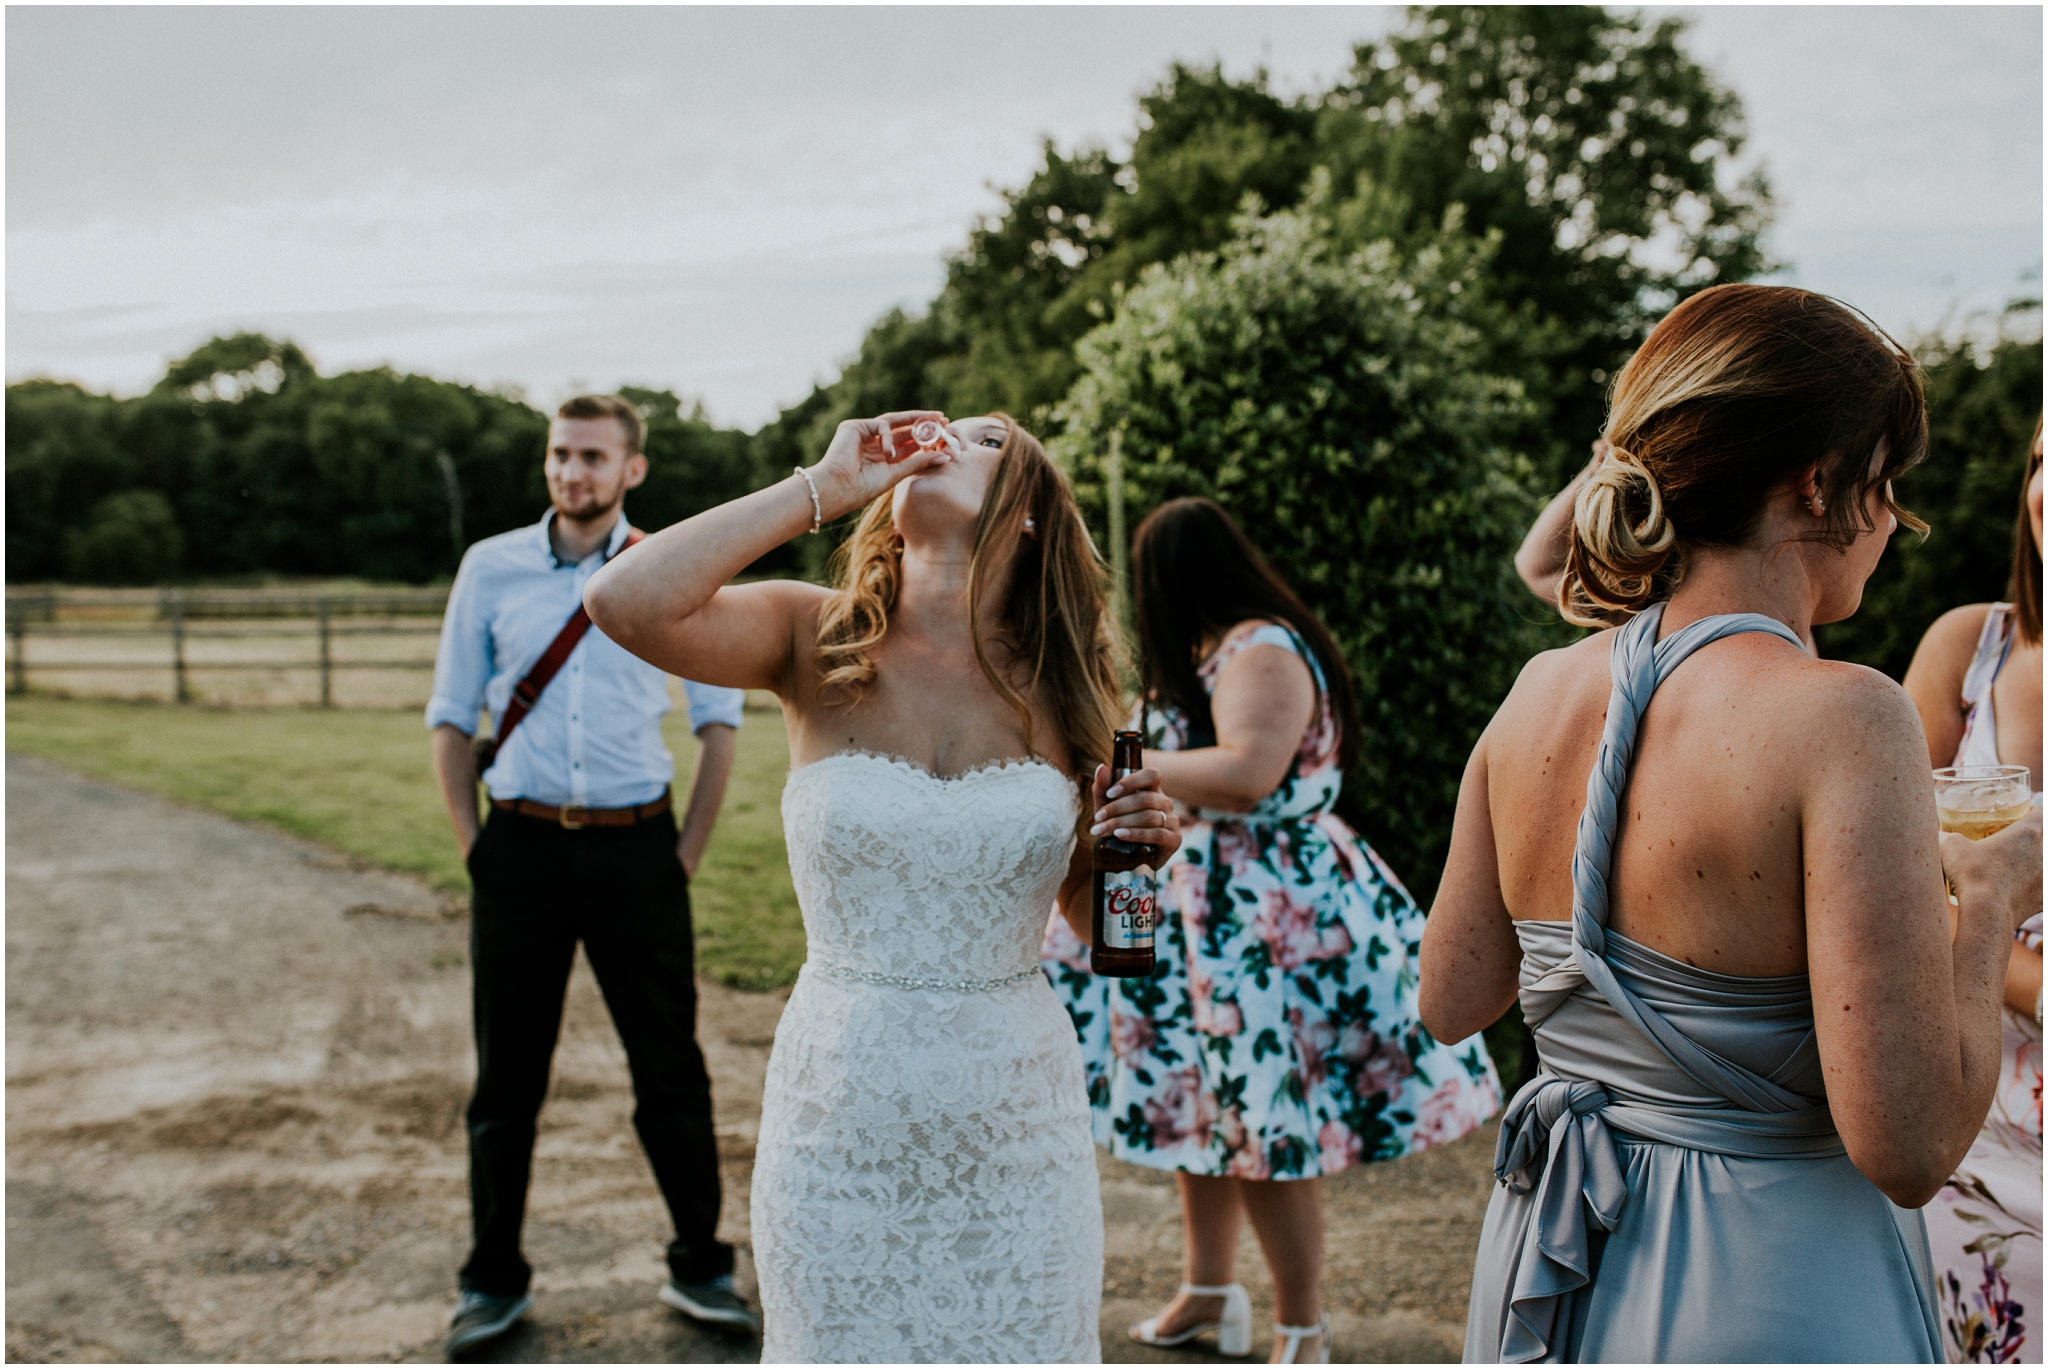 super cool bride doing a shot while holding a beer